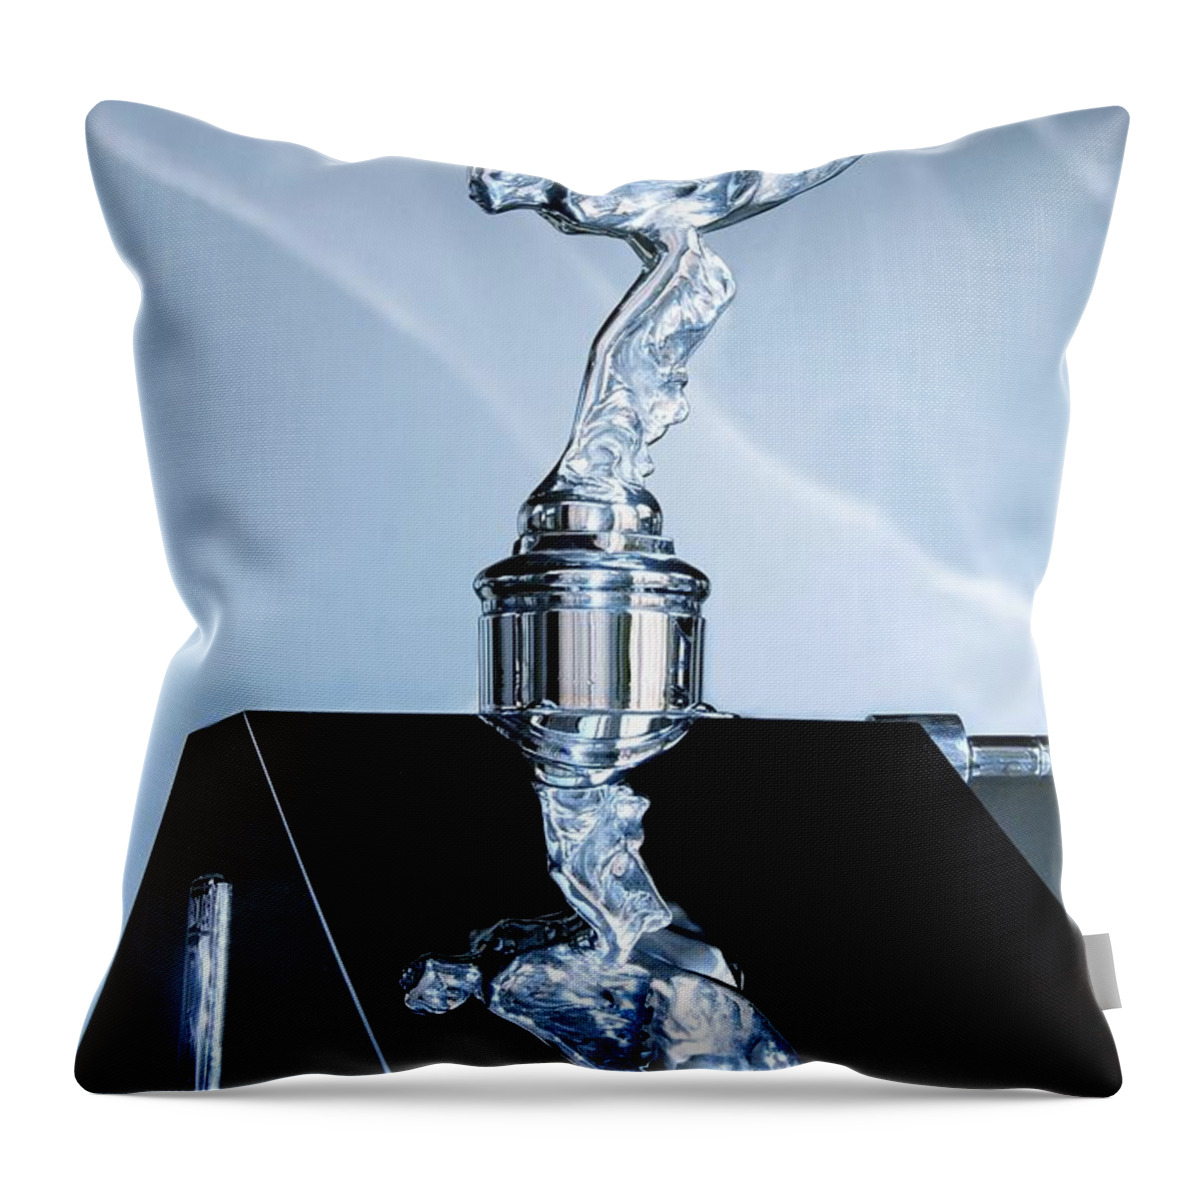 Polished Throw Pillow featuring the photograph Polished by Patrick Witz